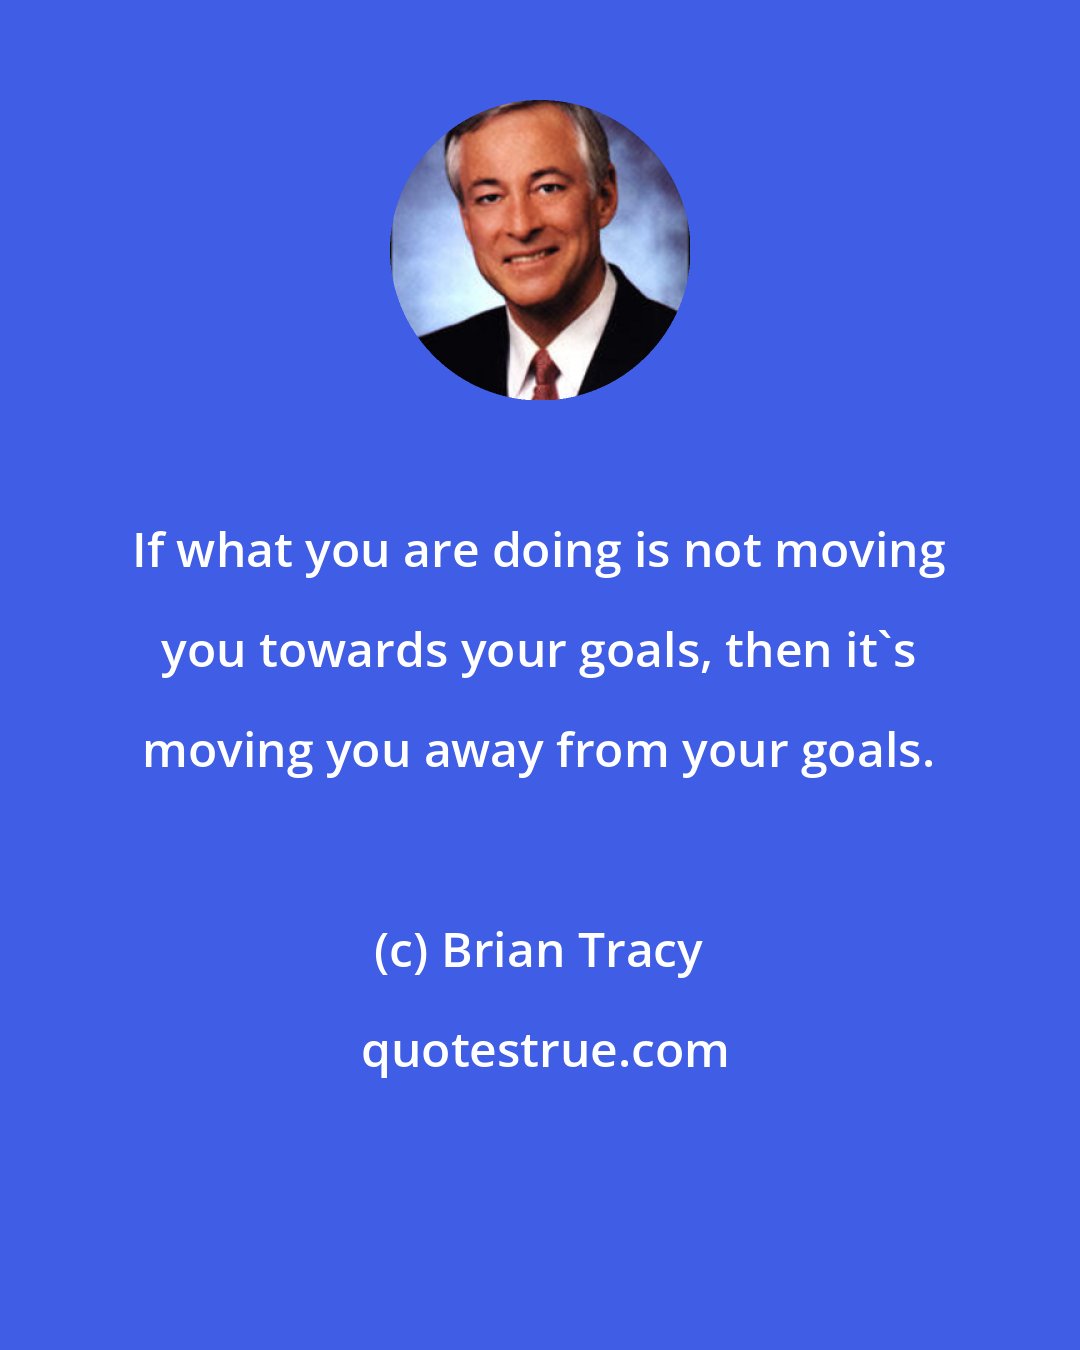 Brian Tracy: If what you are doing is not moving you towards your goals, then it's moving you away from your goals.